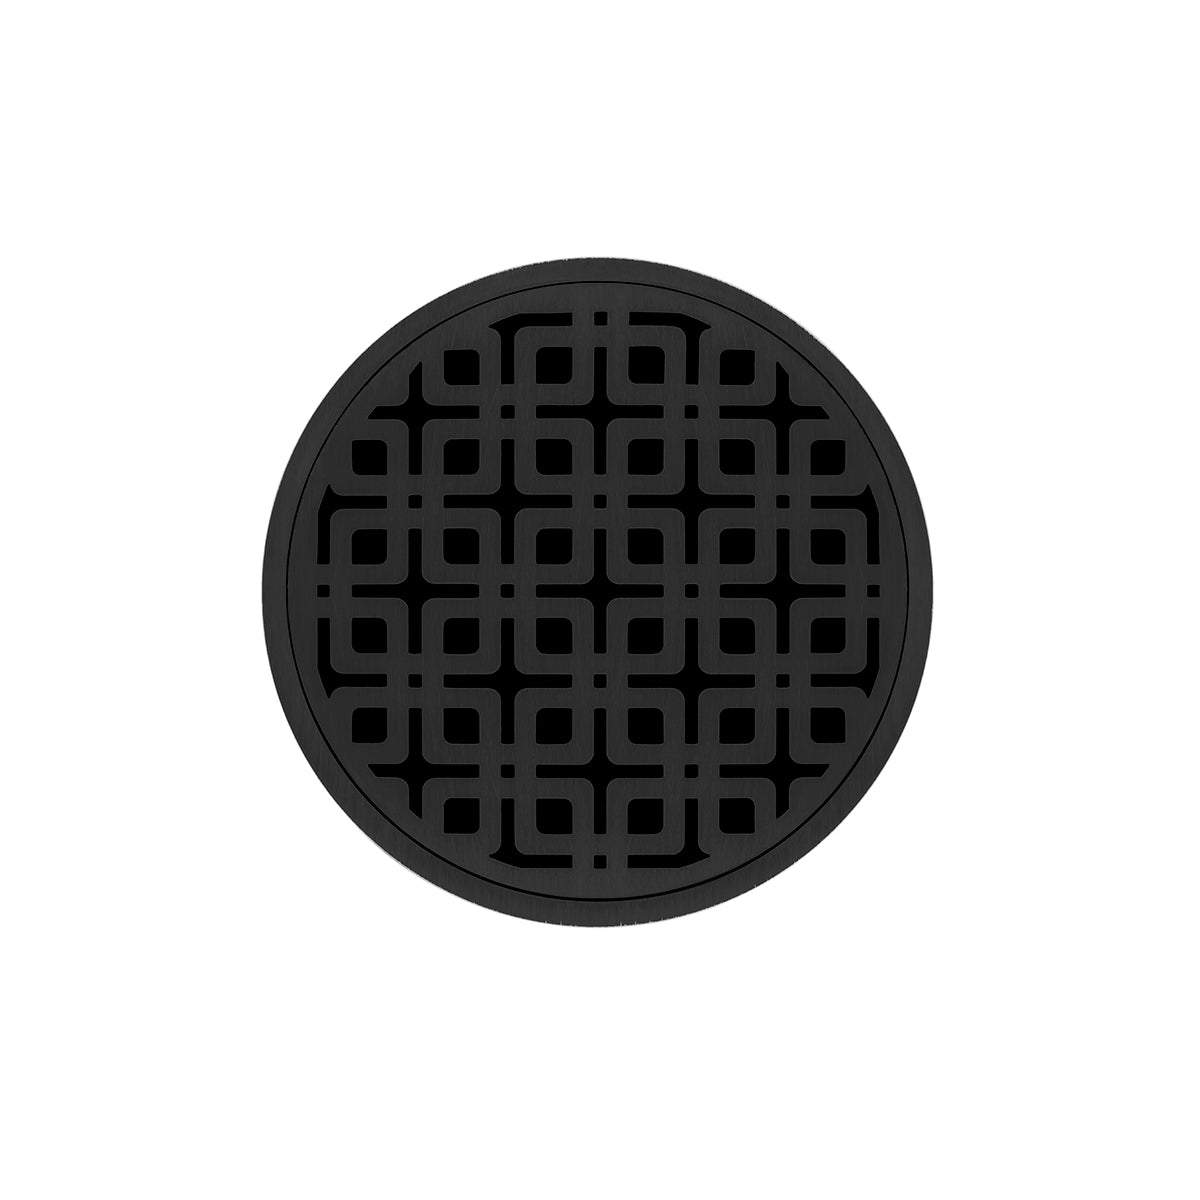 Infinity Drain 5" Round RKD 5 High Flow Premium Center Drain Kit with Link Pattern Decorative Plate with PVC Drain Body, 3" Outlet